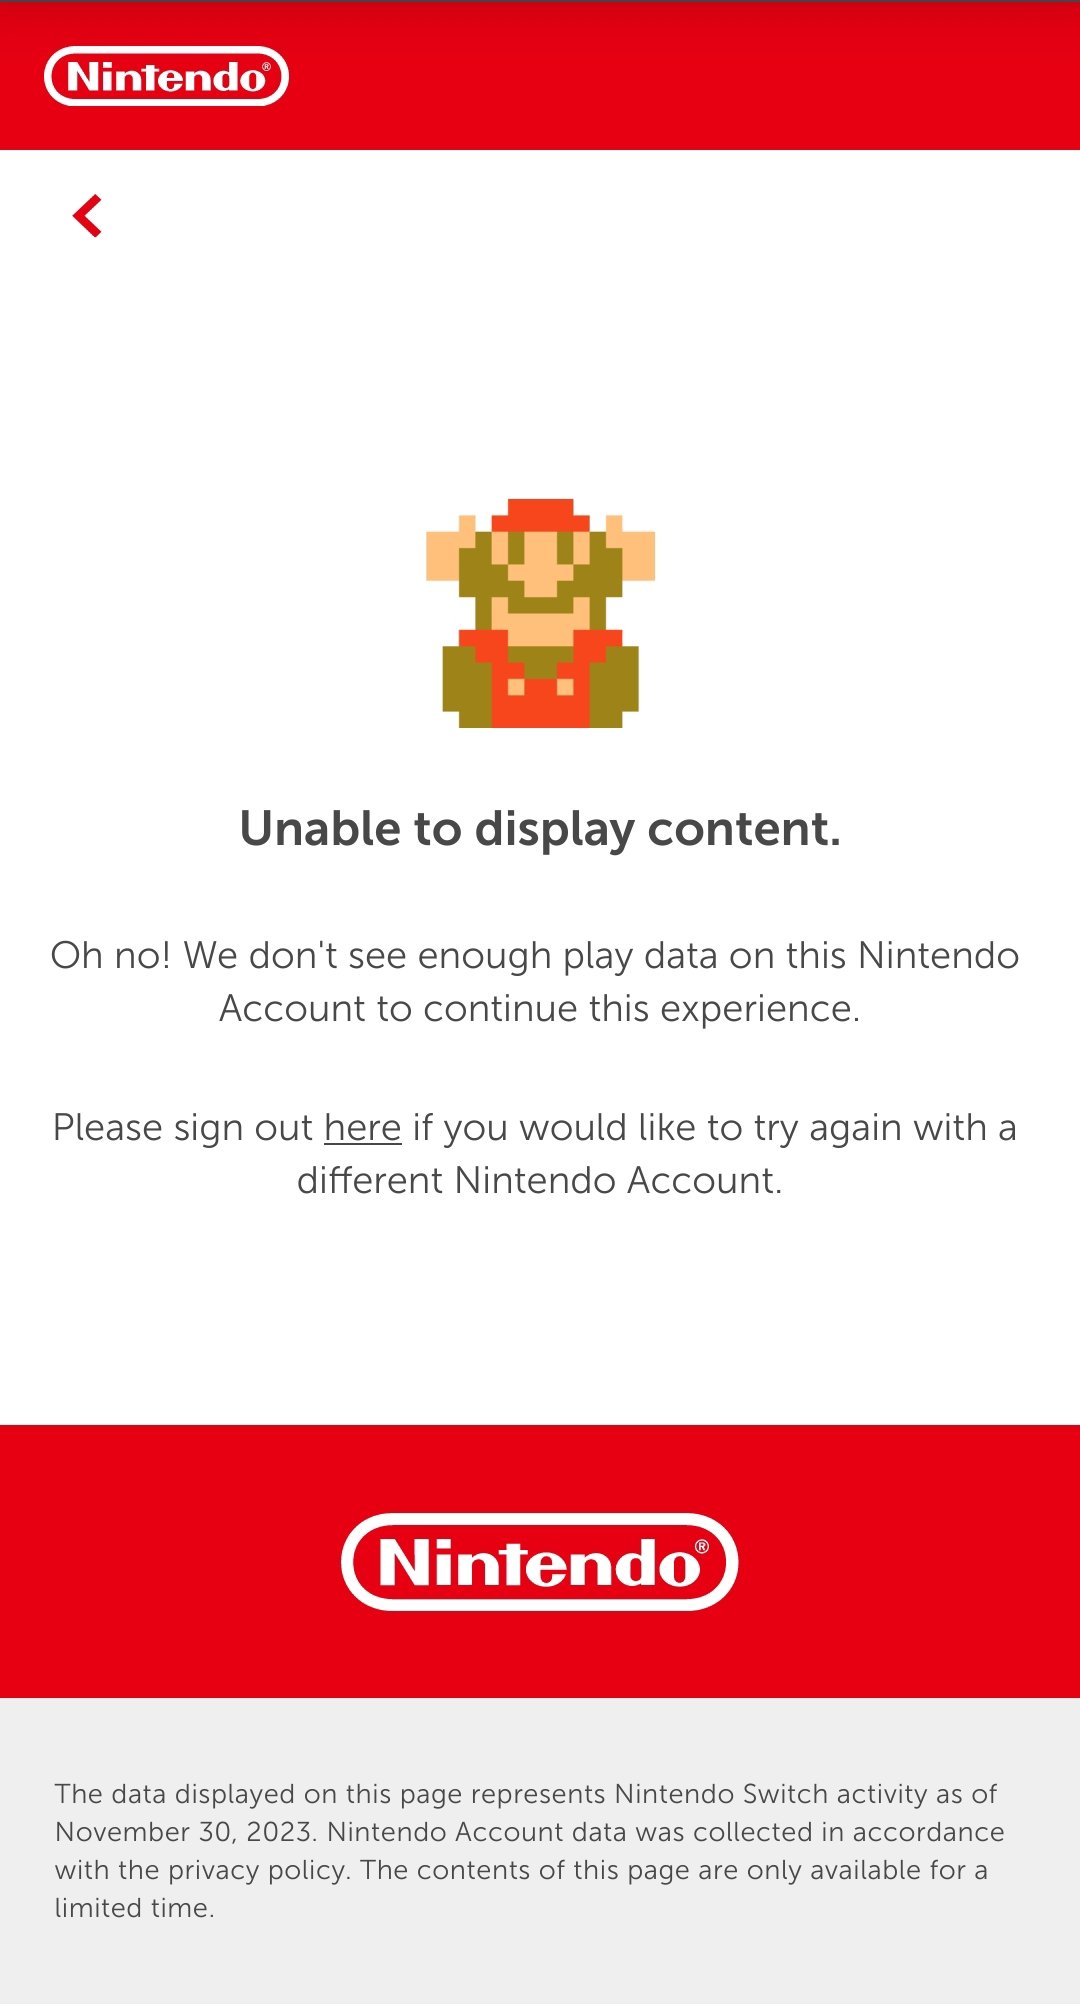 unable to display content due to lack of data, says Nintendo